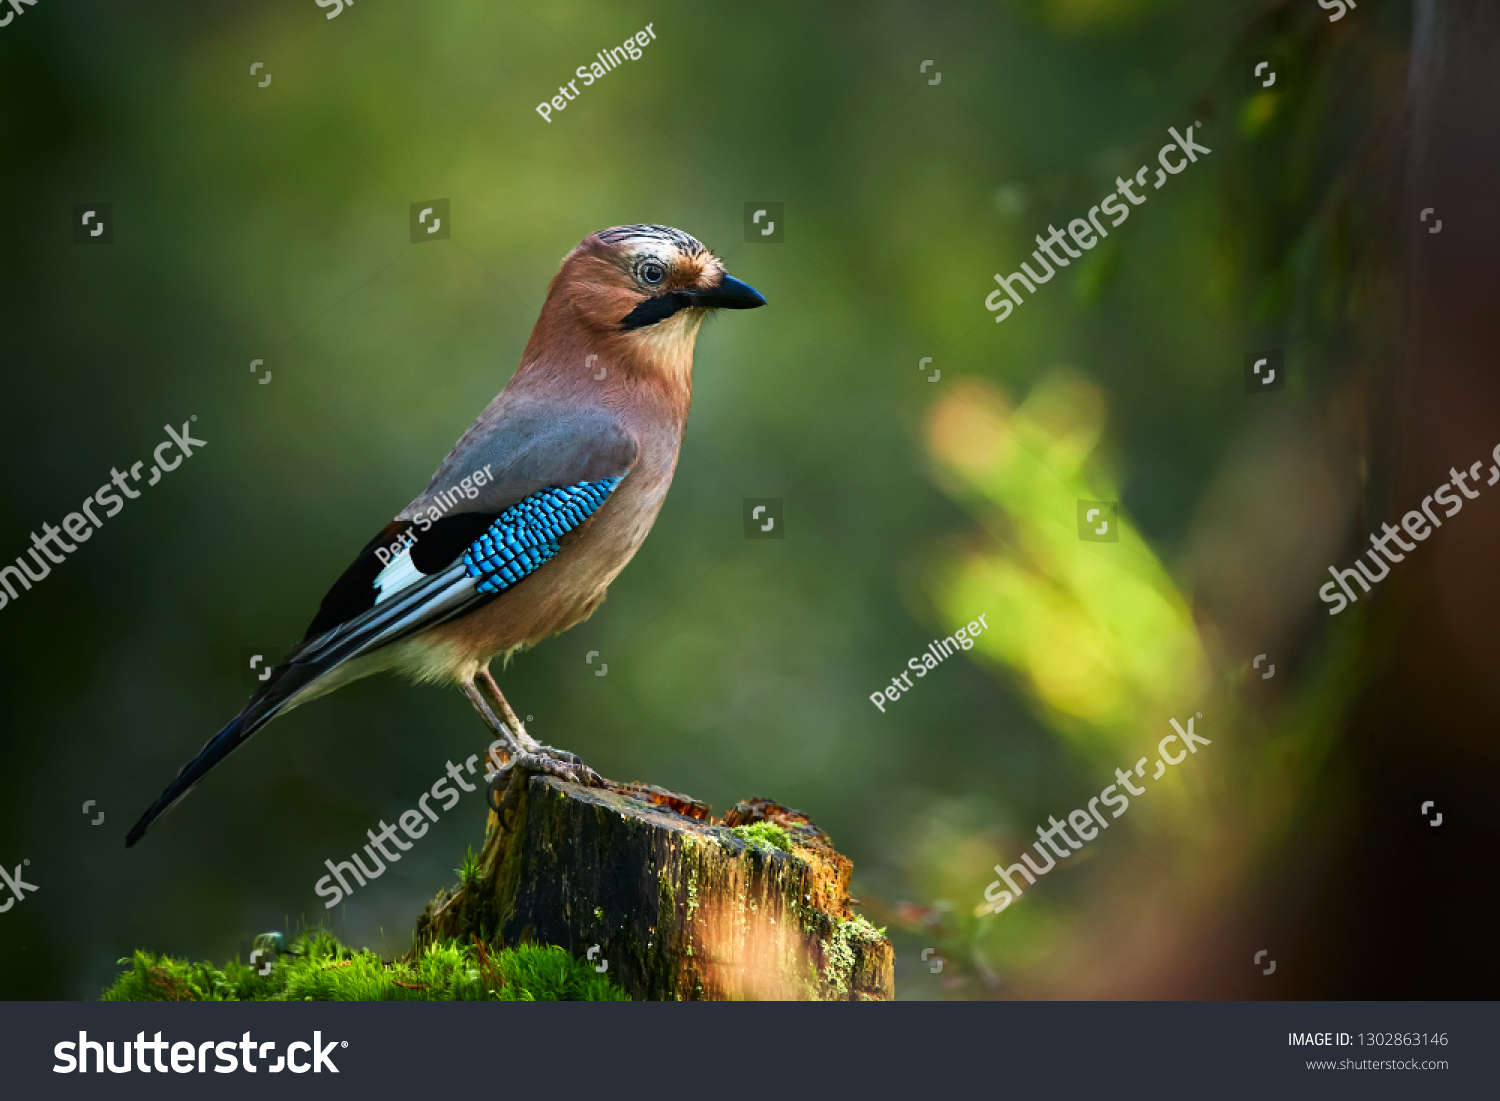 Beautiful picture the Eurasian jay (Garrulus glandarius). A bird sits in a deep forest on a stump. Wildlife scene from Kuhmo, Finland. #1302863146